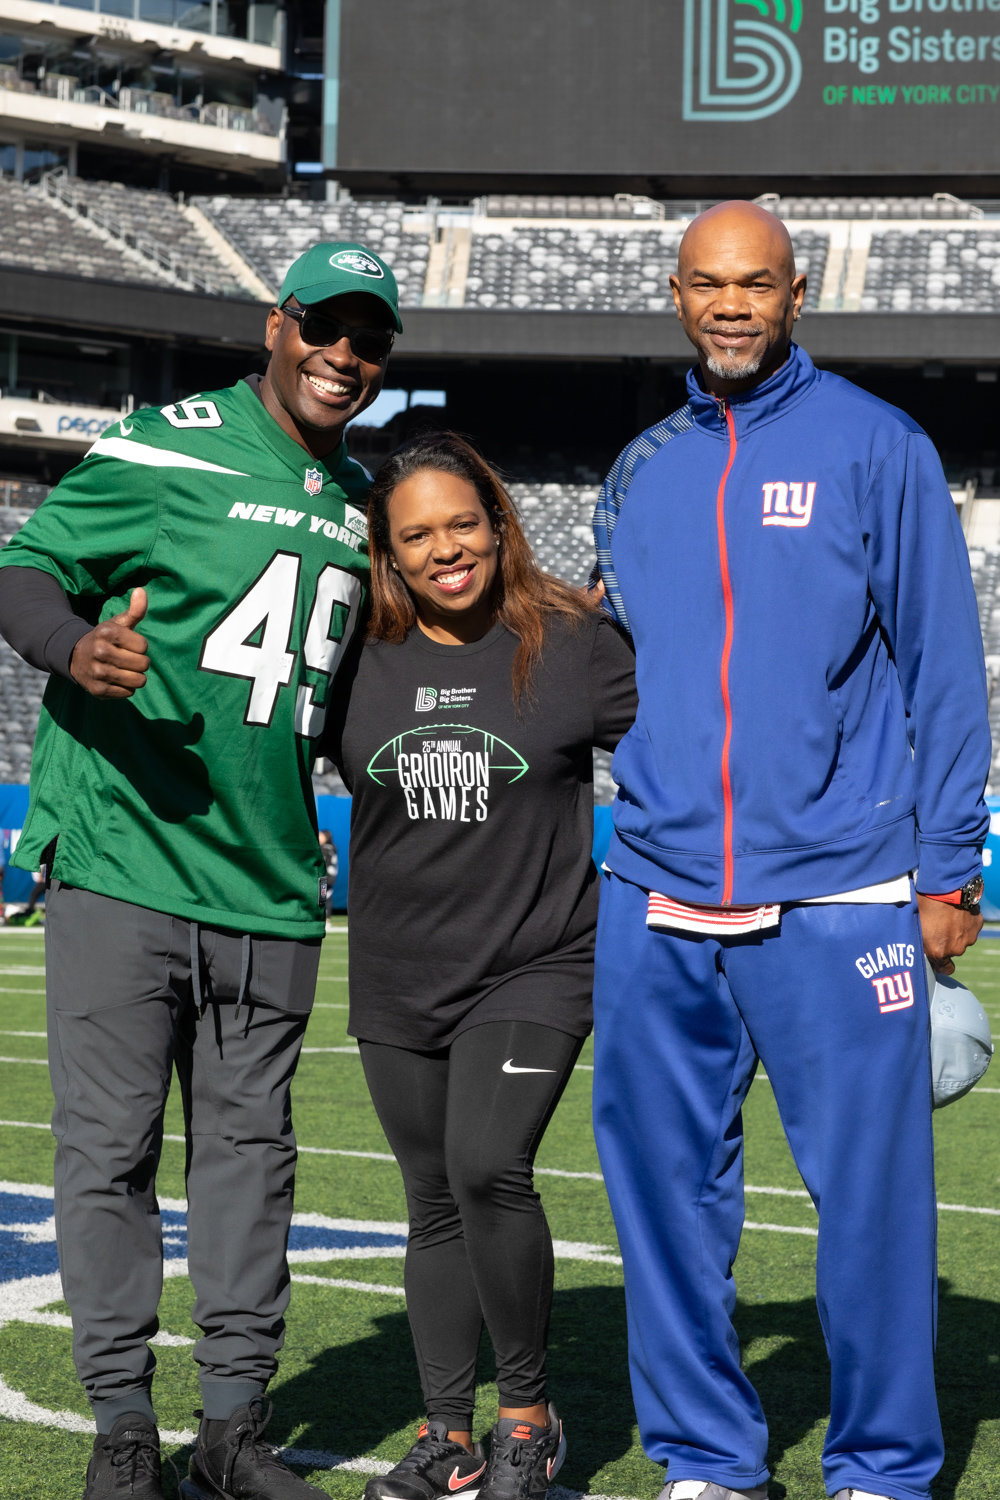 Alicia Guevara participated in her first Gridiron Games as the new chief executive of Big Brothers Big Sisters of New York City last month. Guevara joined the youth mentoring organization in May after years with Part of the Solution hunger program in the Bronx.